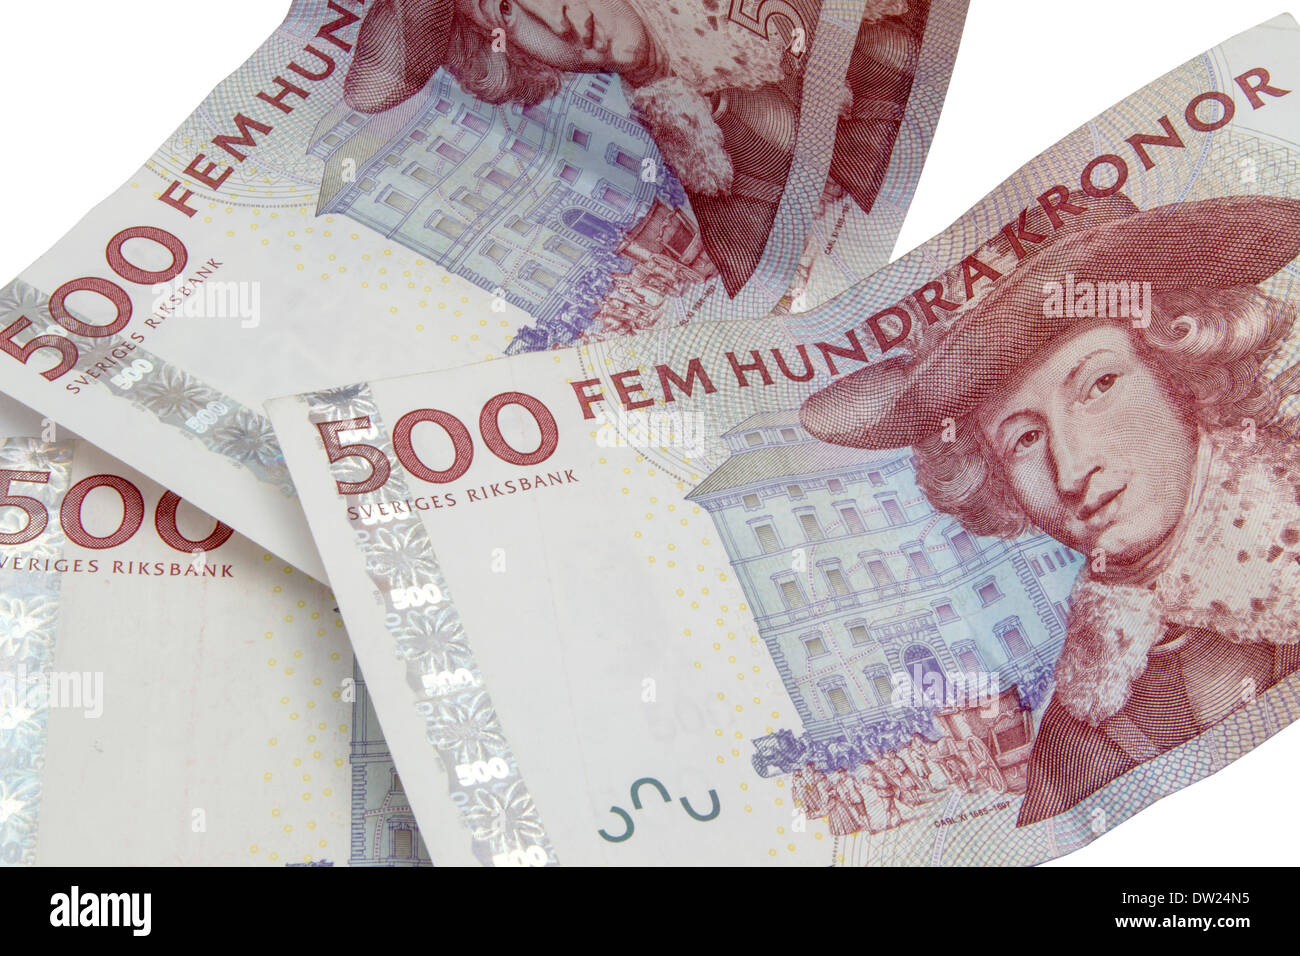 Swedish currency closeup on white background. 500 Kronor Stock Photo